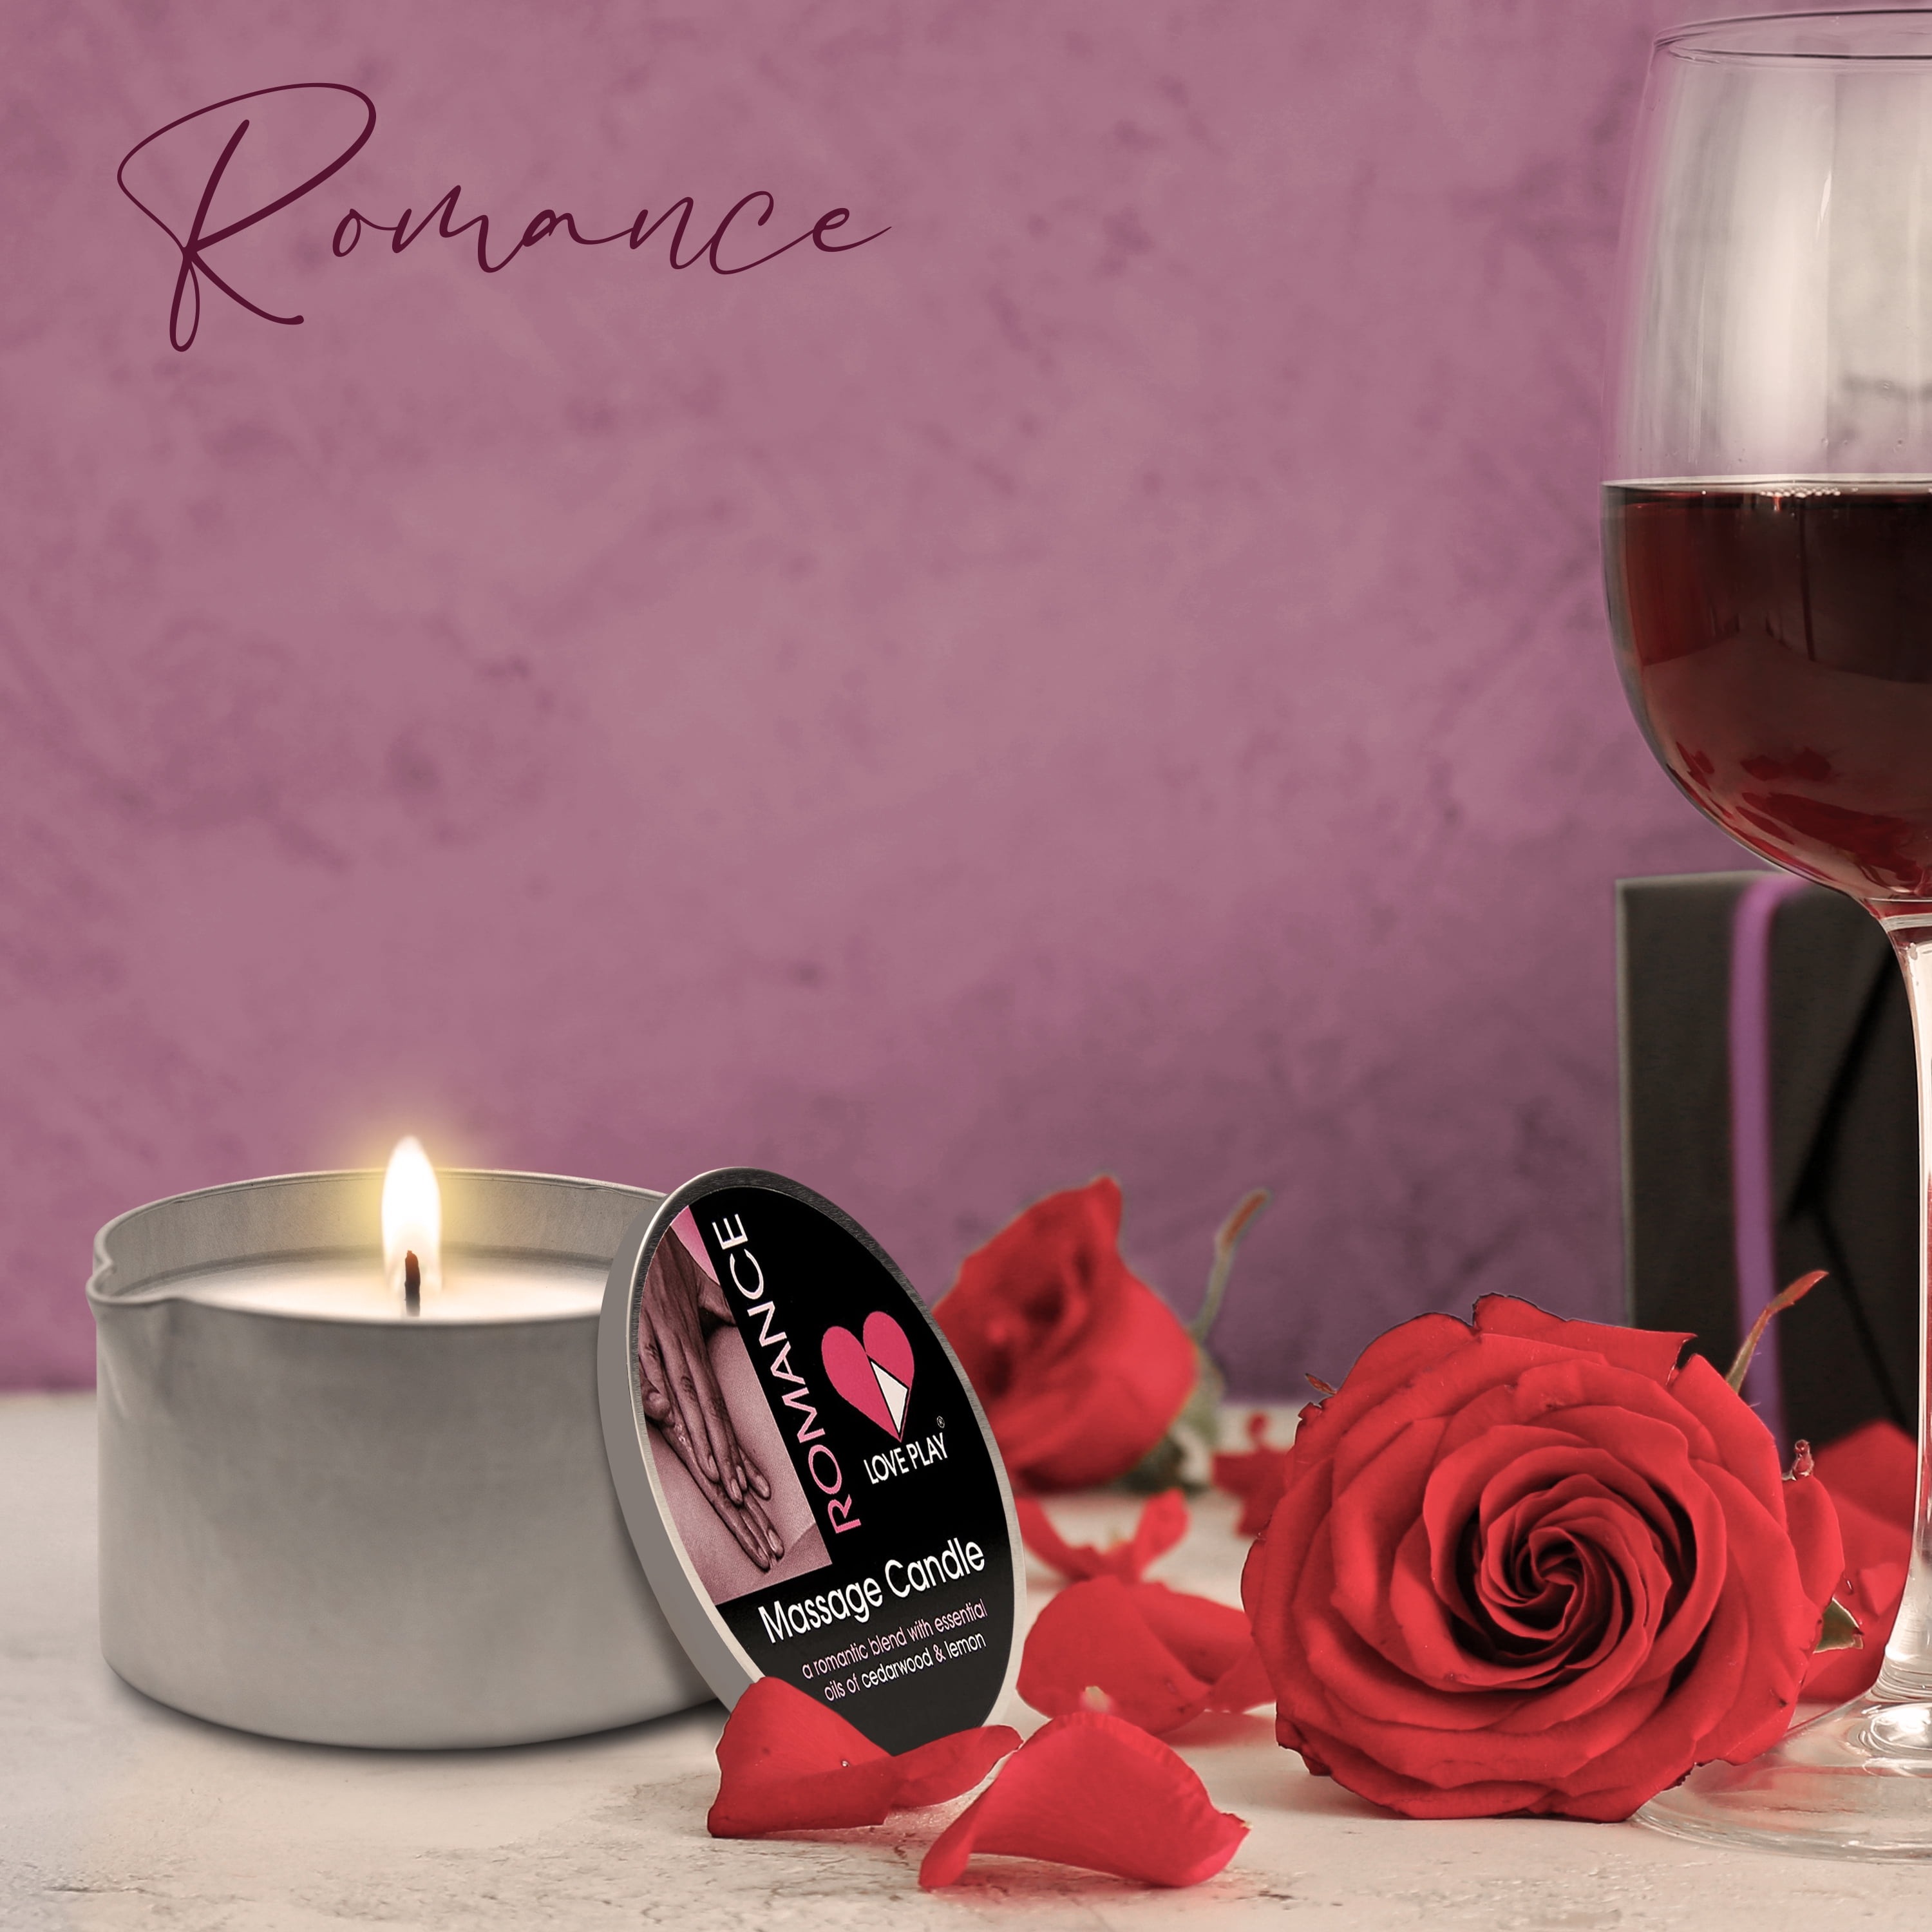 How to make Massage Candles for Romantic Nights In